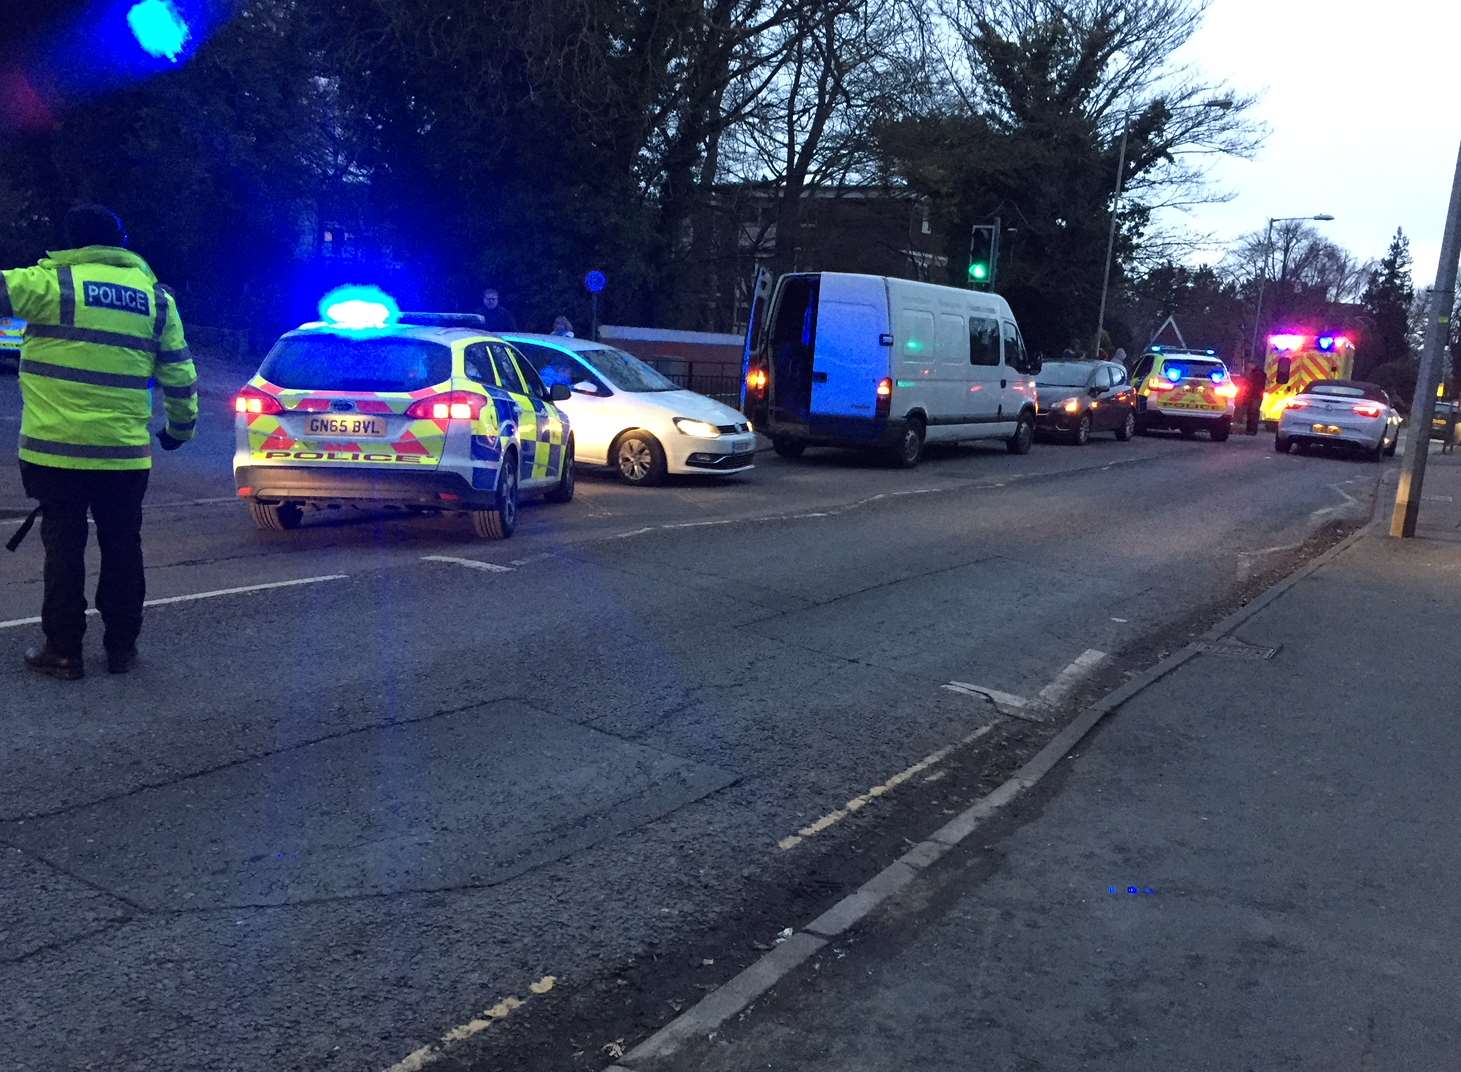 The incident happened in New Dover Road, Canterbury